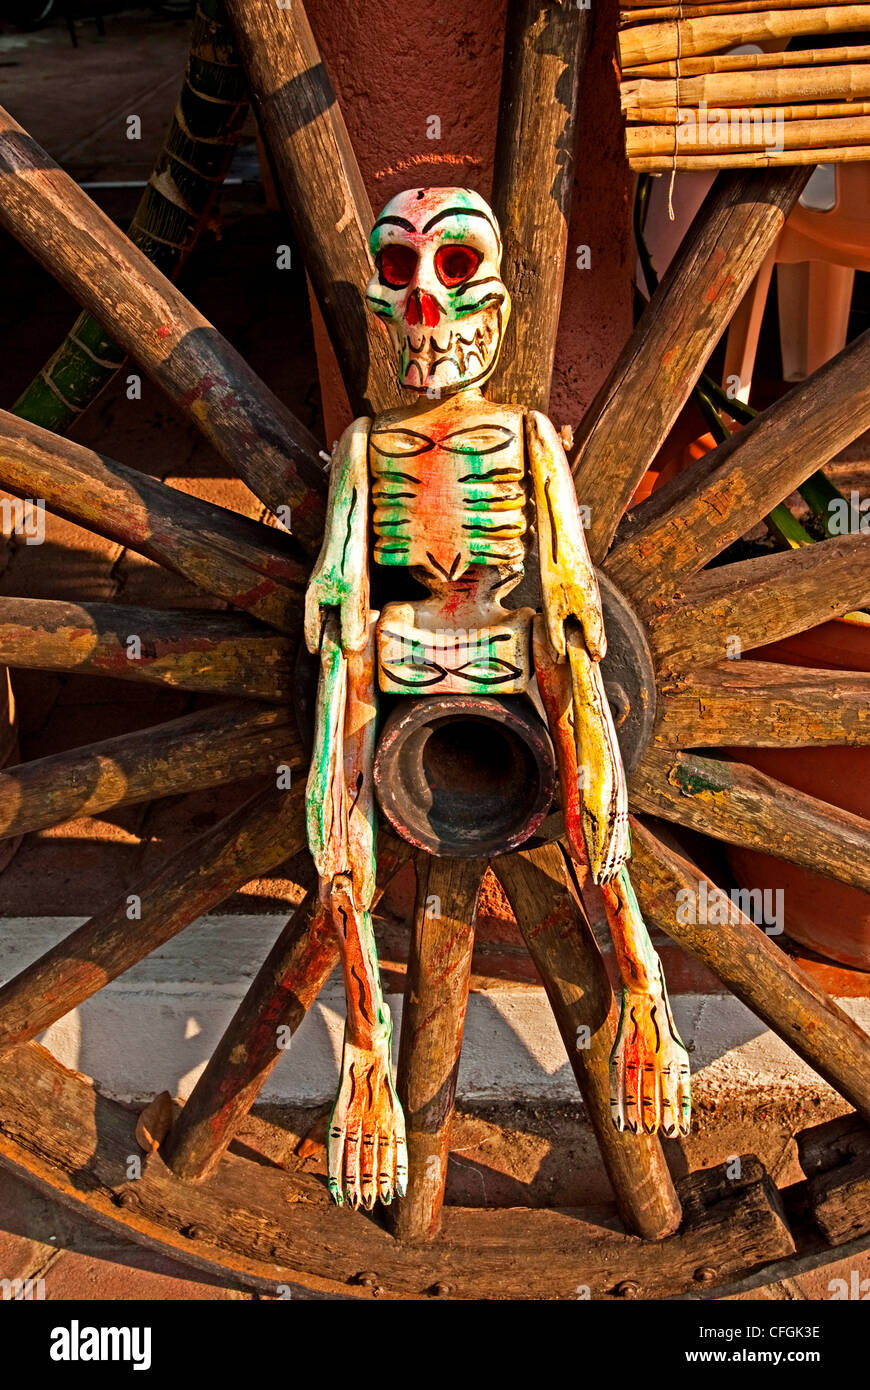 Day of the Dead skeleton puppet against a wagon wheel in front of a restaurant in downtown Zihuatanejo, Mexico Stock Photo